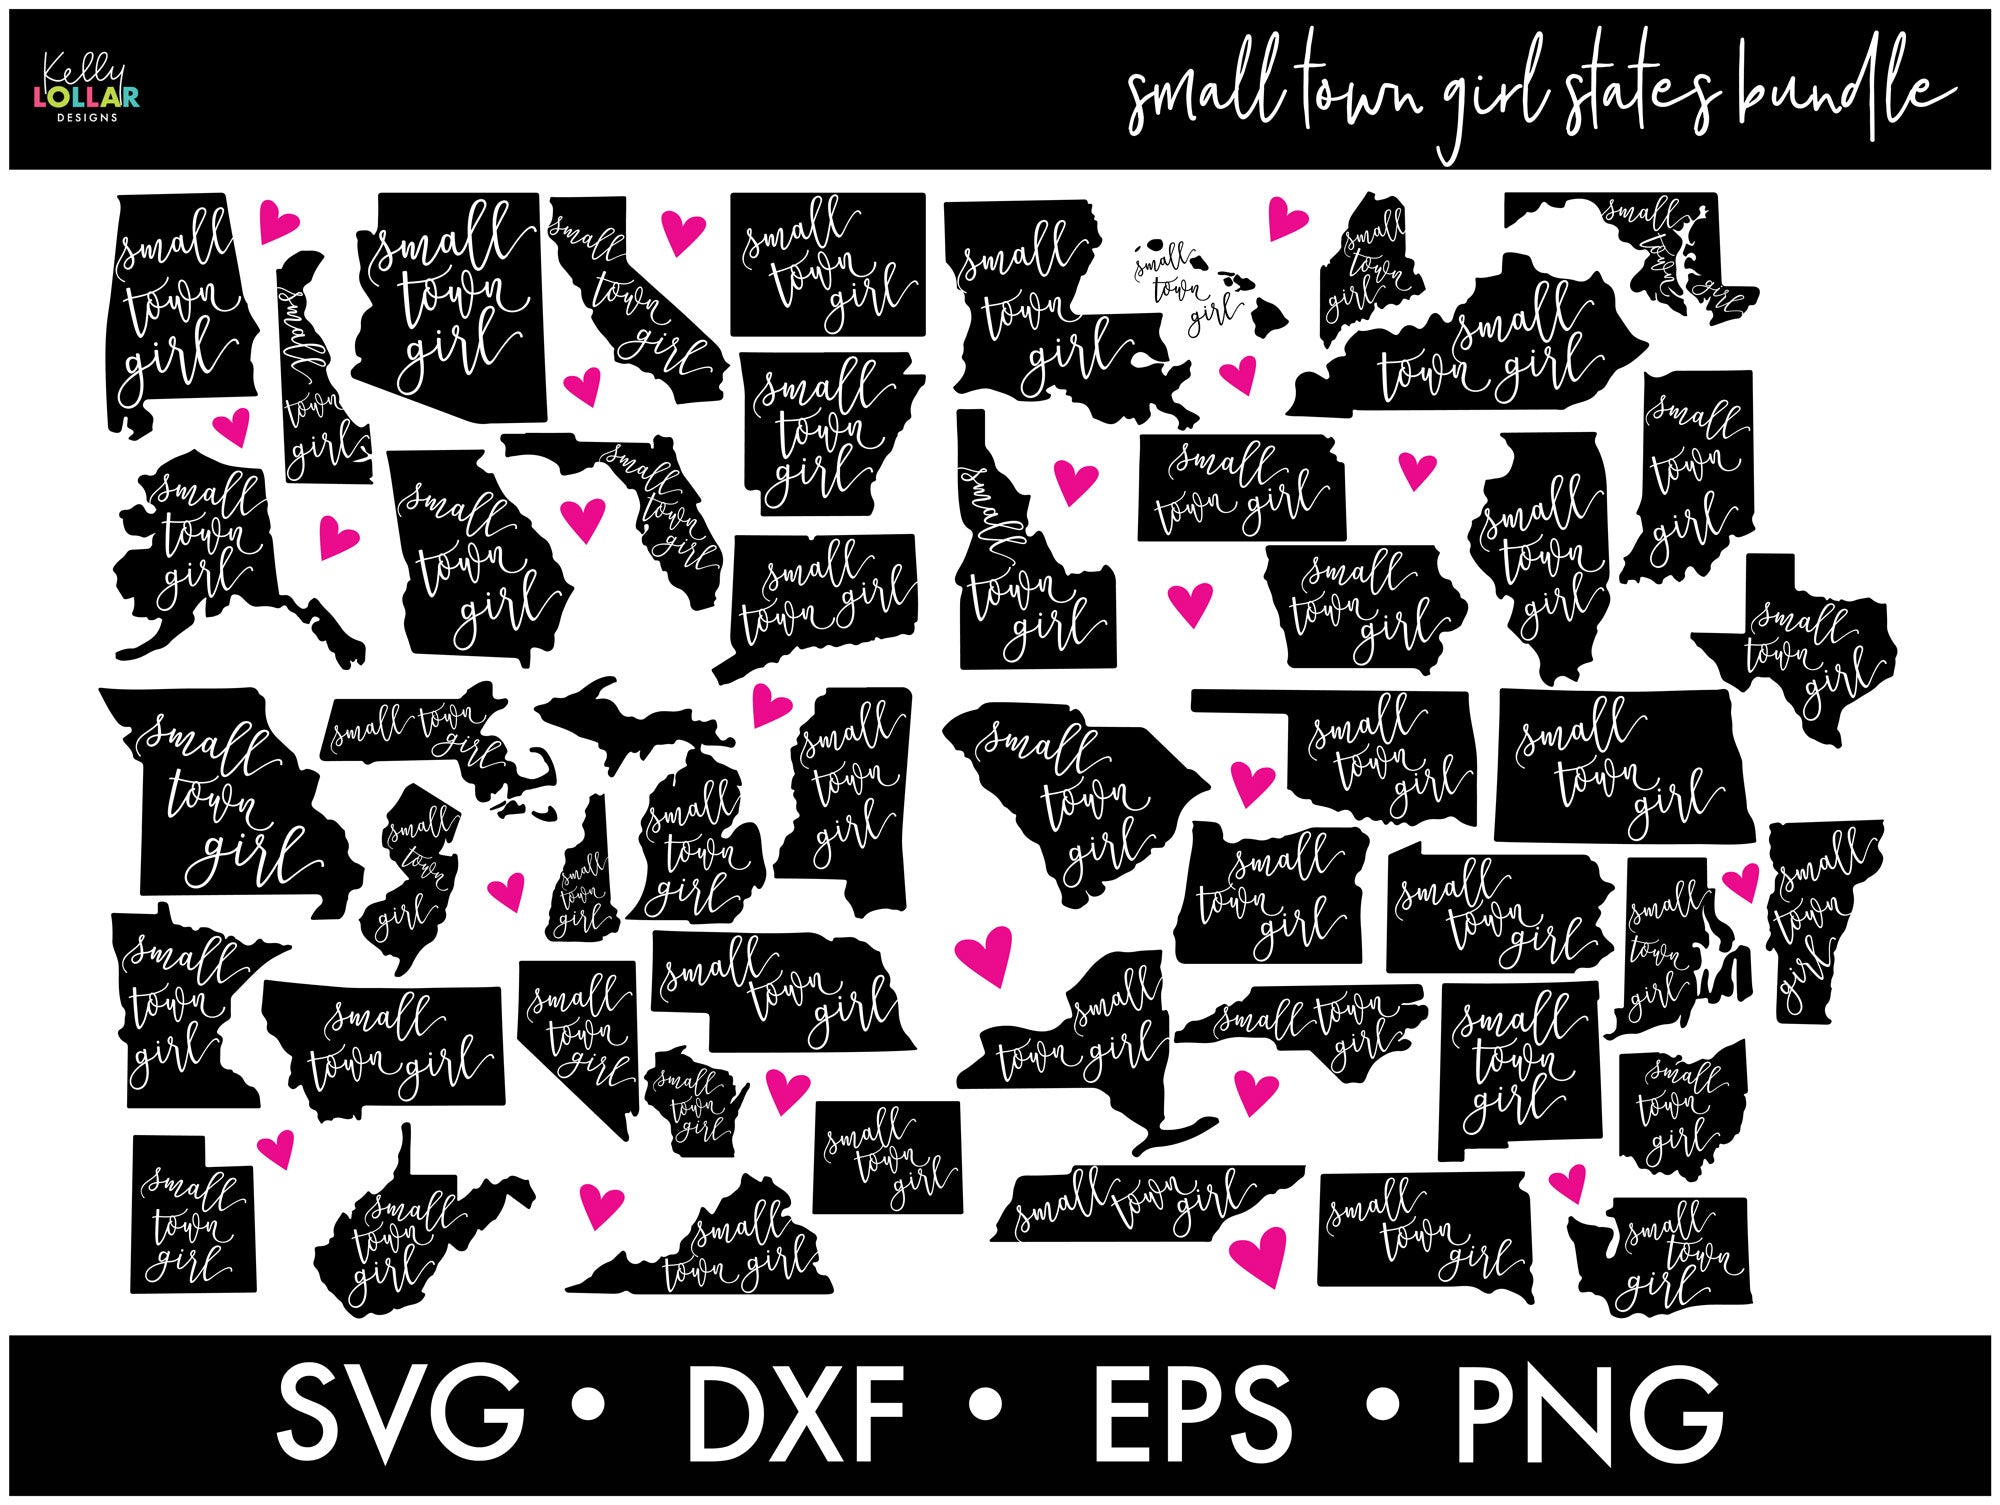 Wisconsin State Bundle  SVG DXF EPS PNG Cut Files - Kelly Lollar